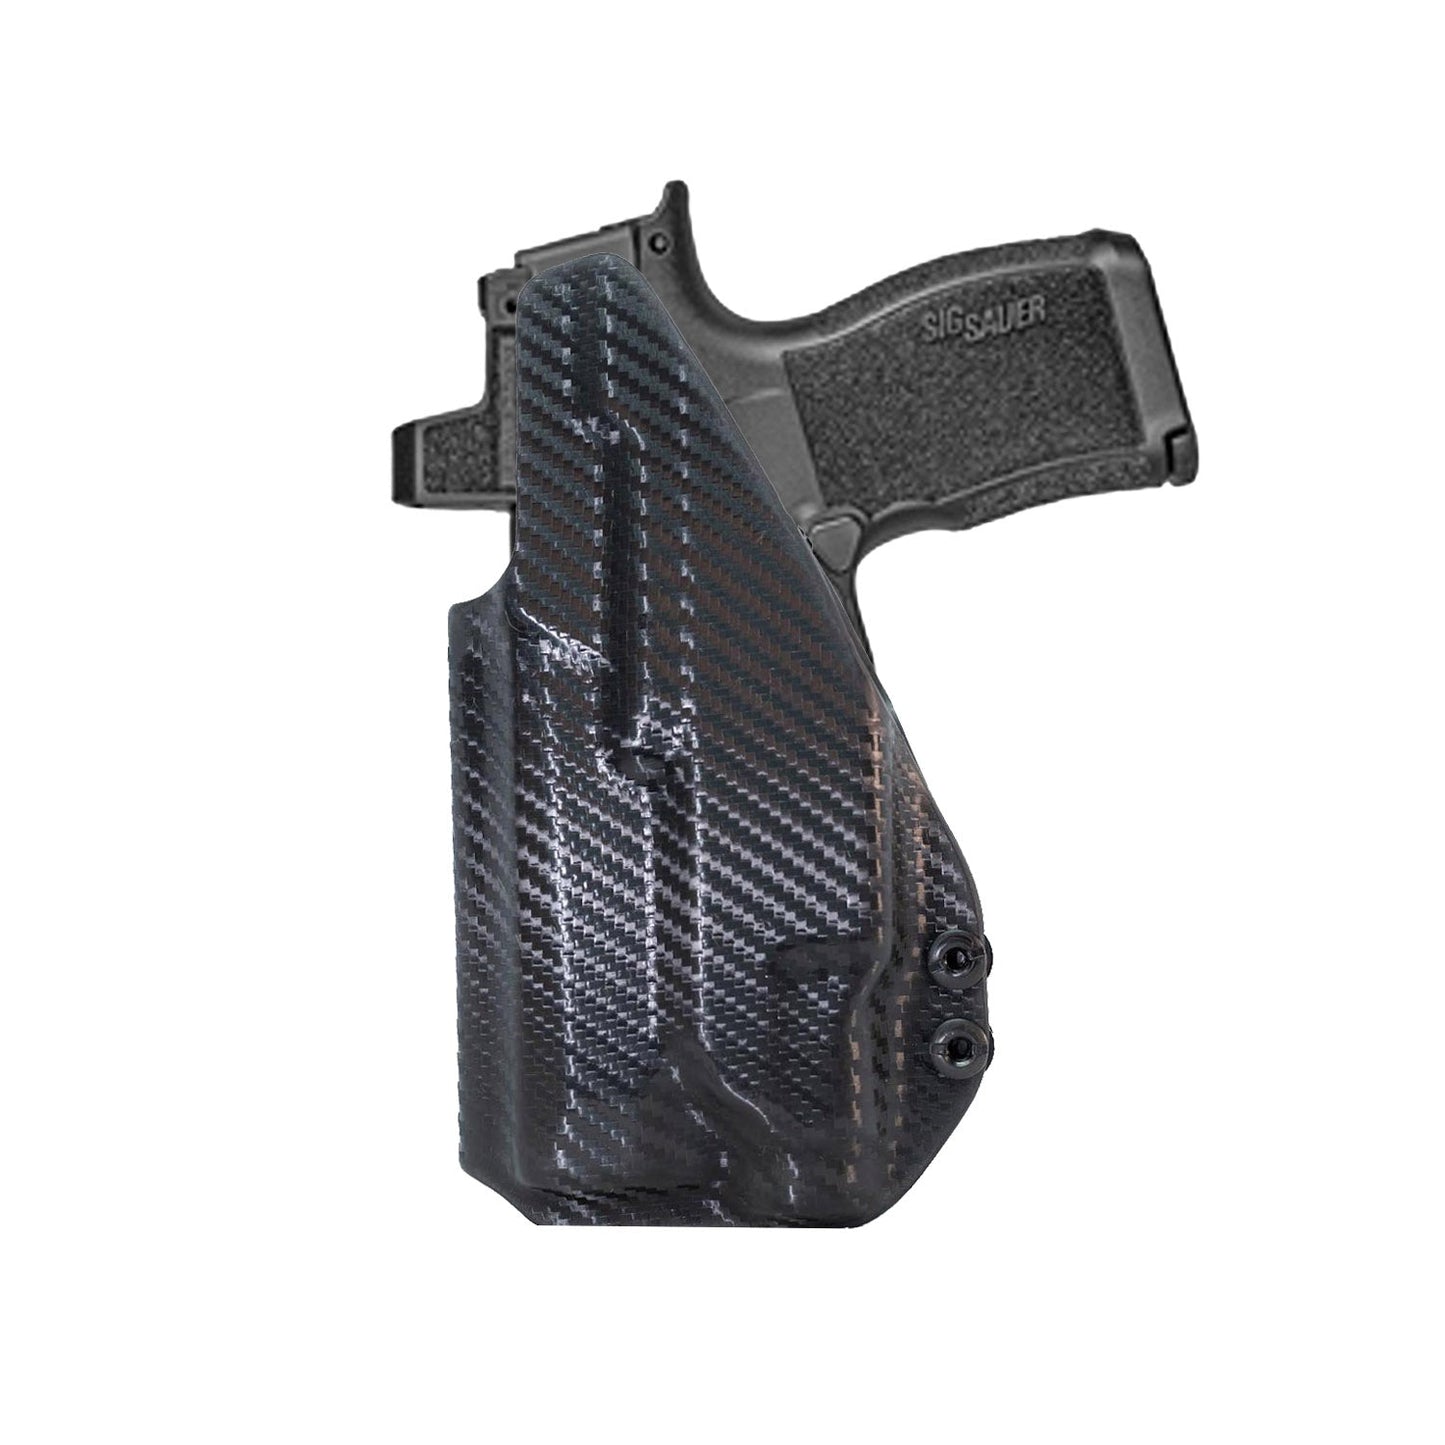 Glock 21 With TLR1 Light IWB (Inside The Waistband Holster)